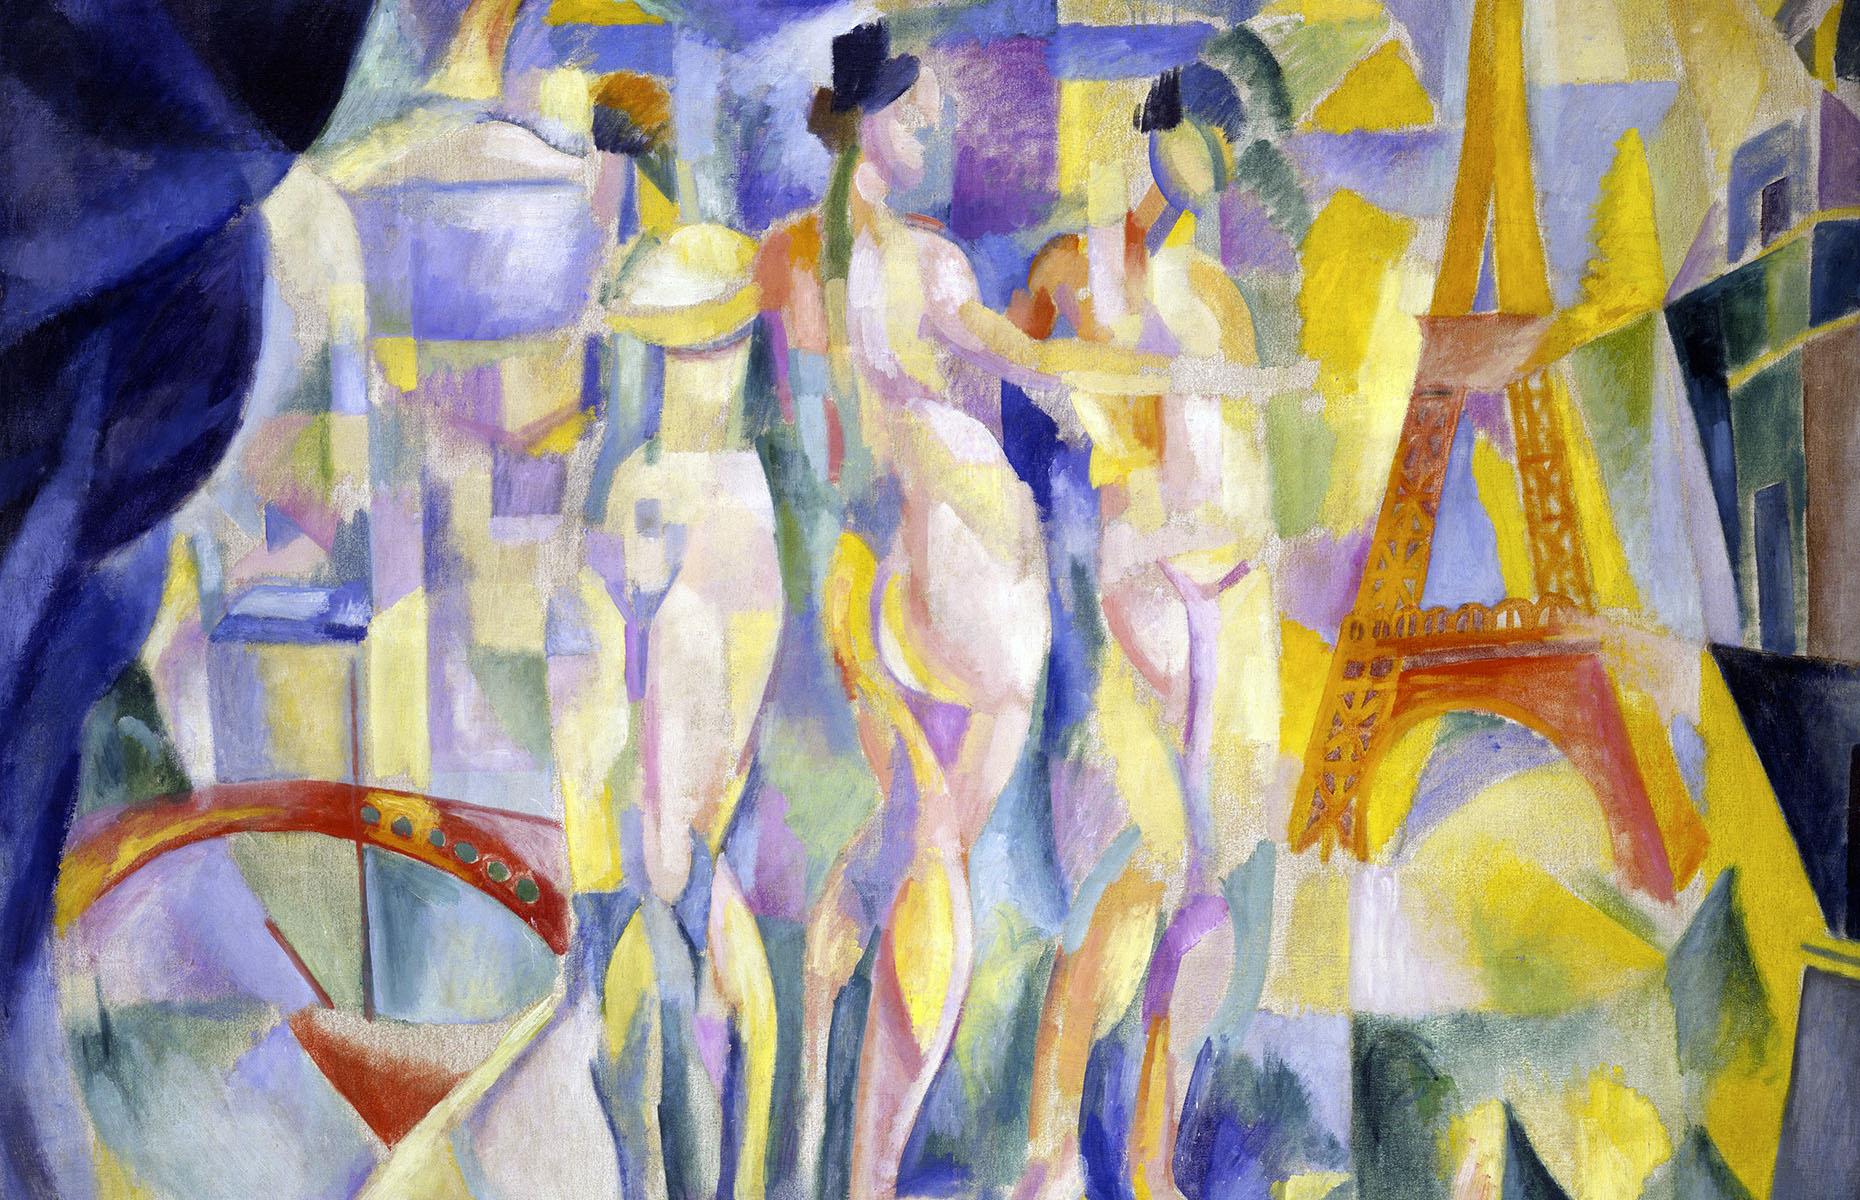 <p>Whatever its color, the bold, symmetrical lines of the Eiffel Tower have always inspired artists. Georges Seurat painted it in 1888, before it was even finished. Over the years it has been painted by Le Douanier Rousseau, Signac, Bonnard, Utrillo, Gromaire, Vuillard, Dufy and Chagall, whose bright, vibrant renditions of the tower have once again found favor with art critics. In 1910, French artist Robert Delaunay produced a whole series of canvas paintings in a cubist style (pictured).</p>